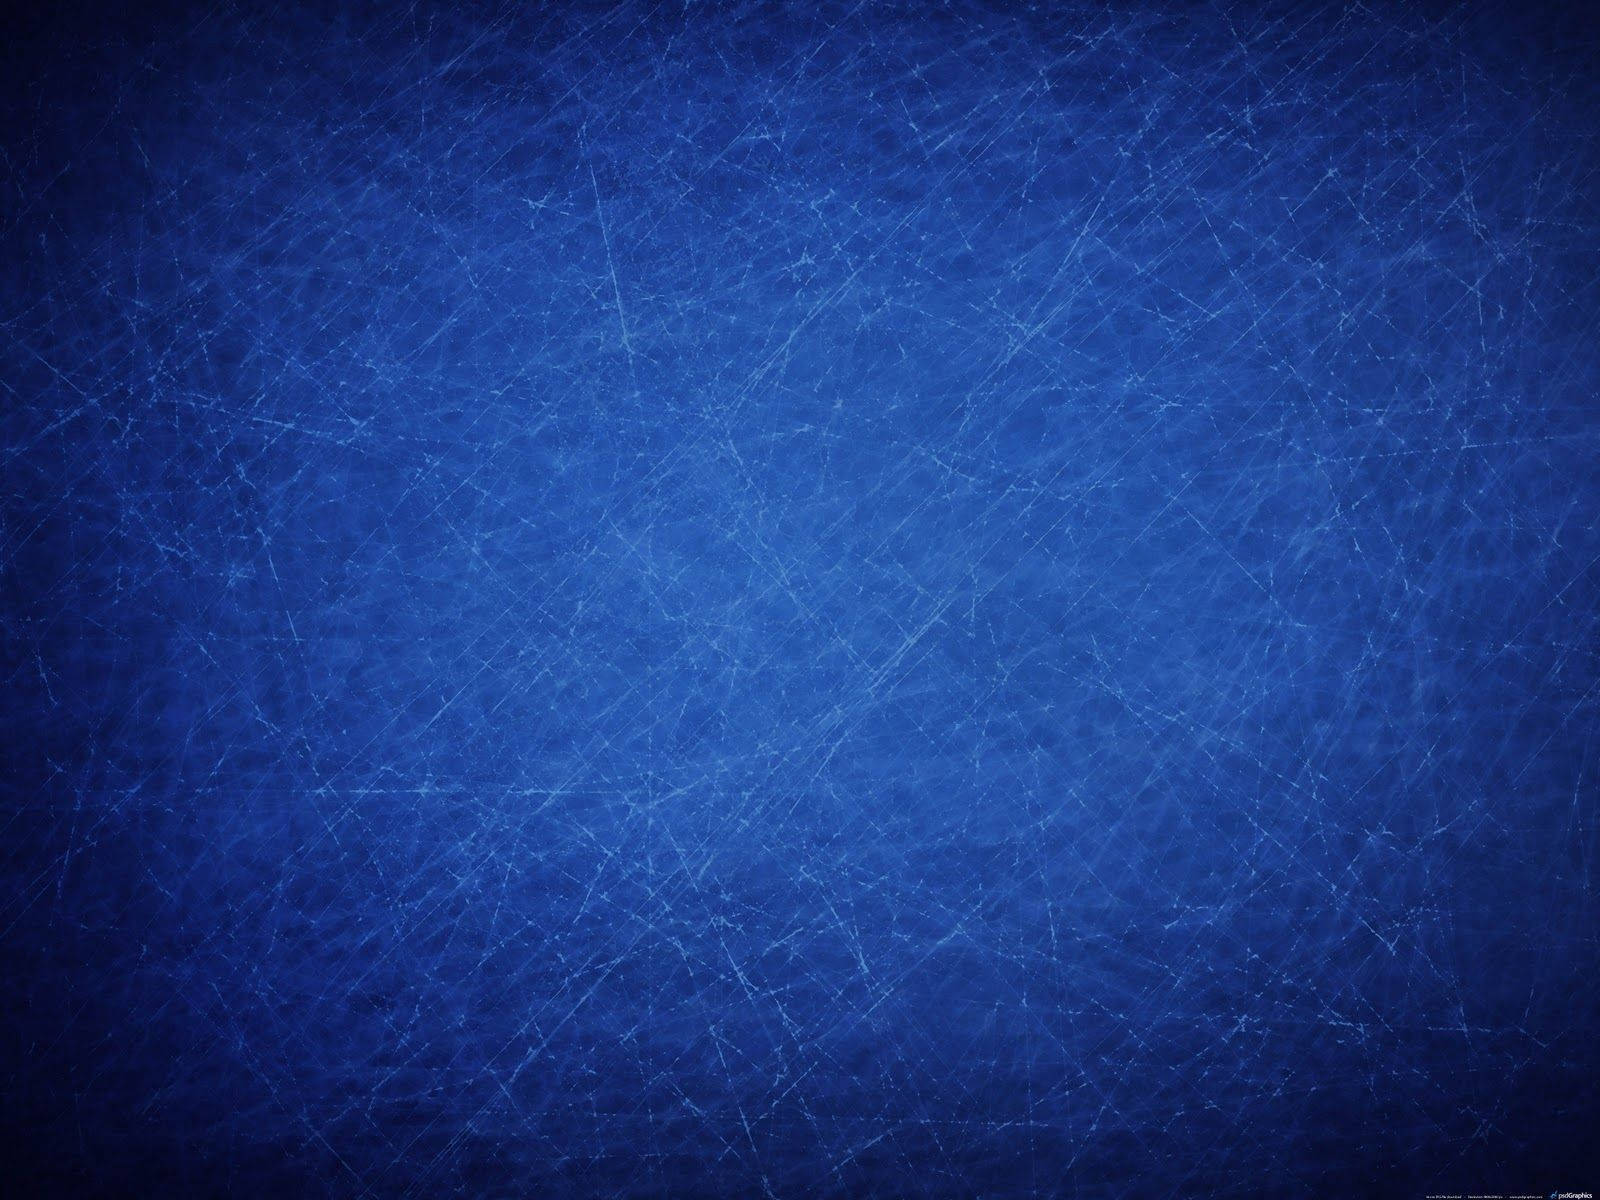 100+] Blue Fade Wallpapers